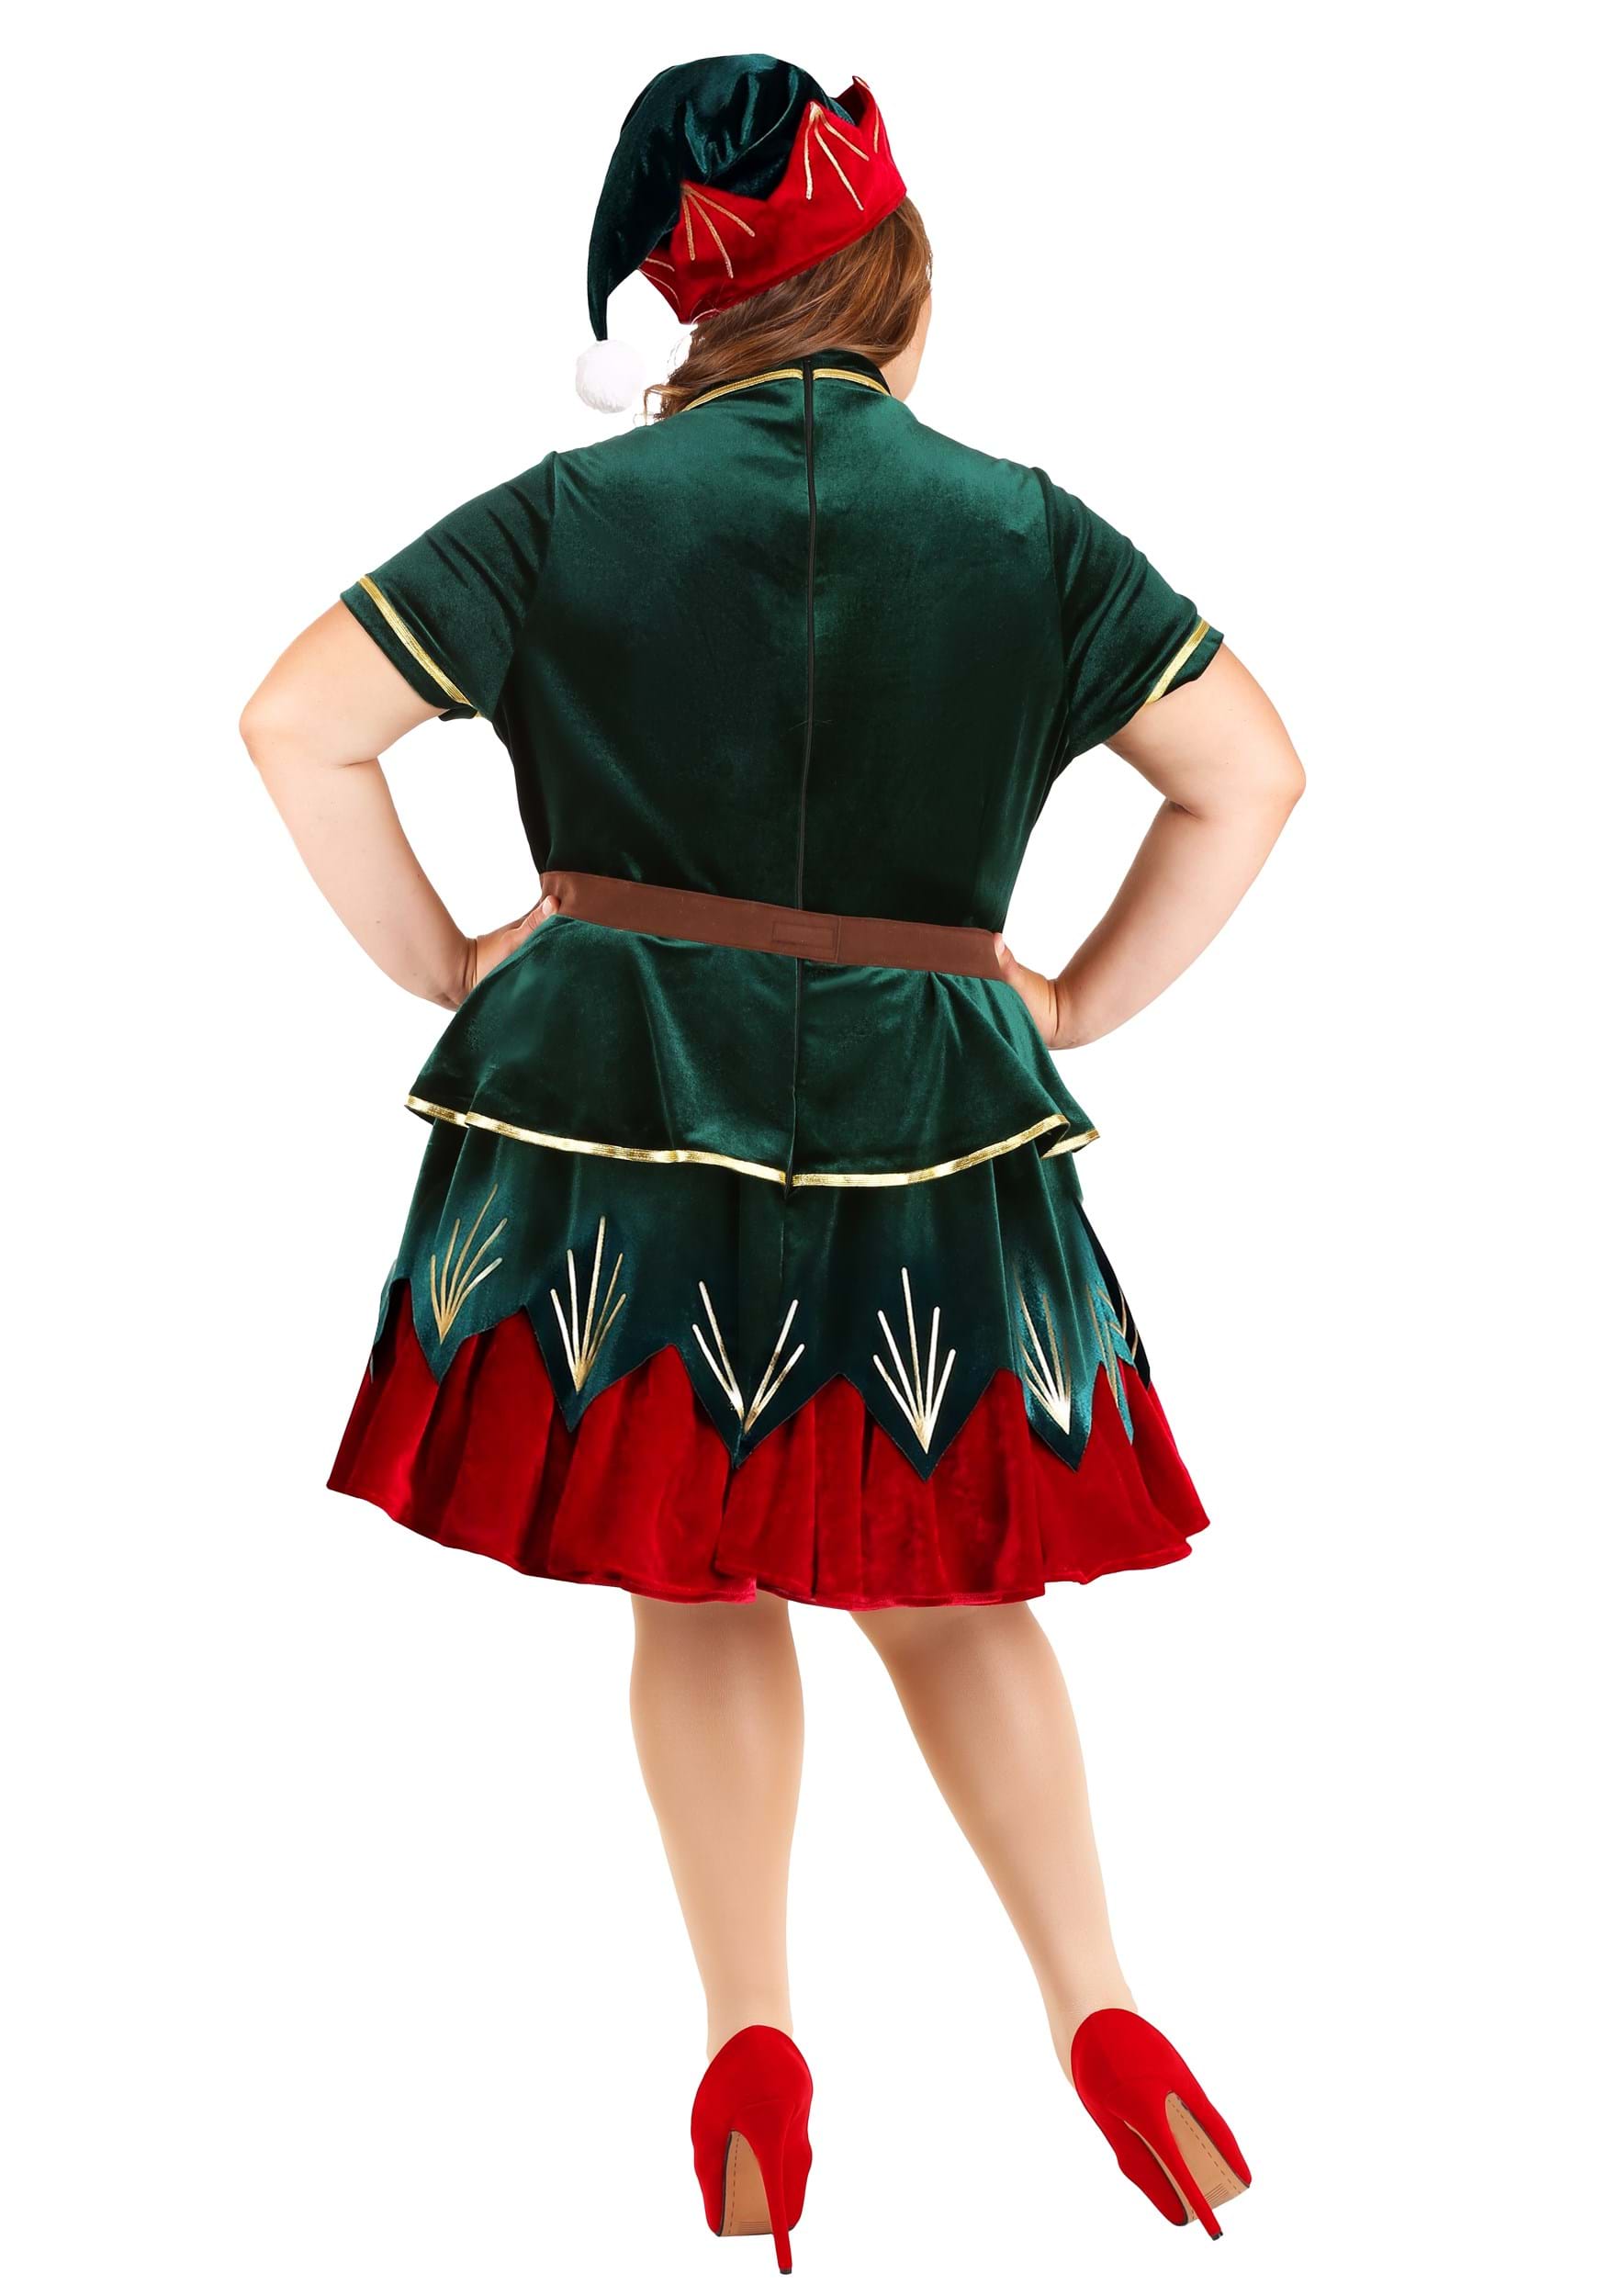 Plus Size Deluxe Holiday Elf Fancy Dress Costume For Women